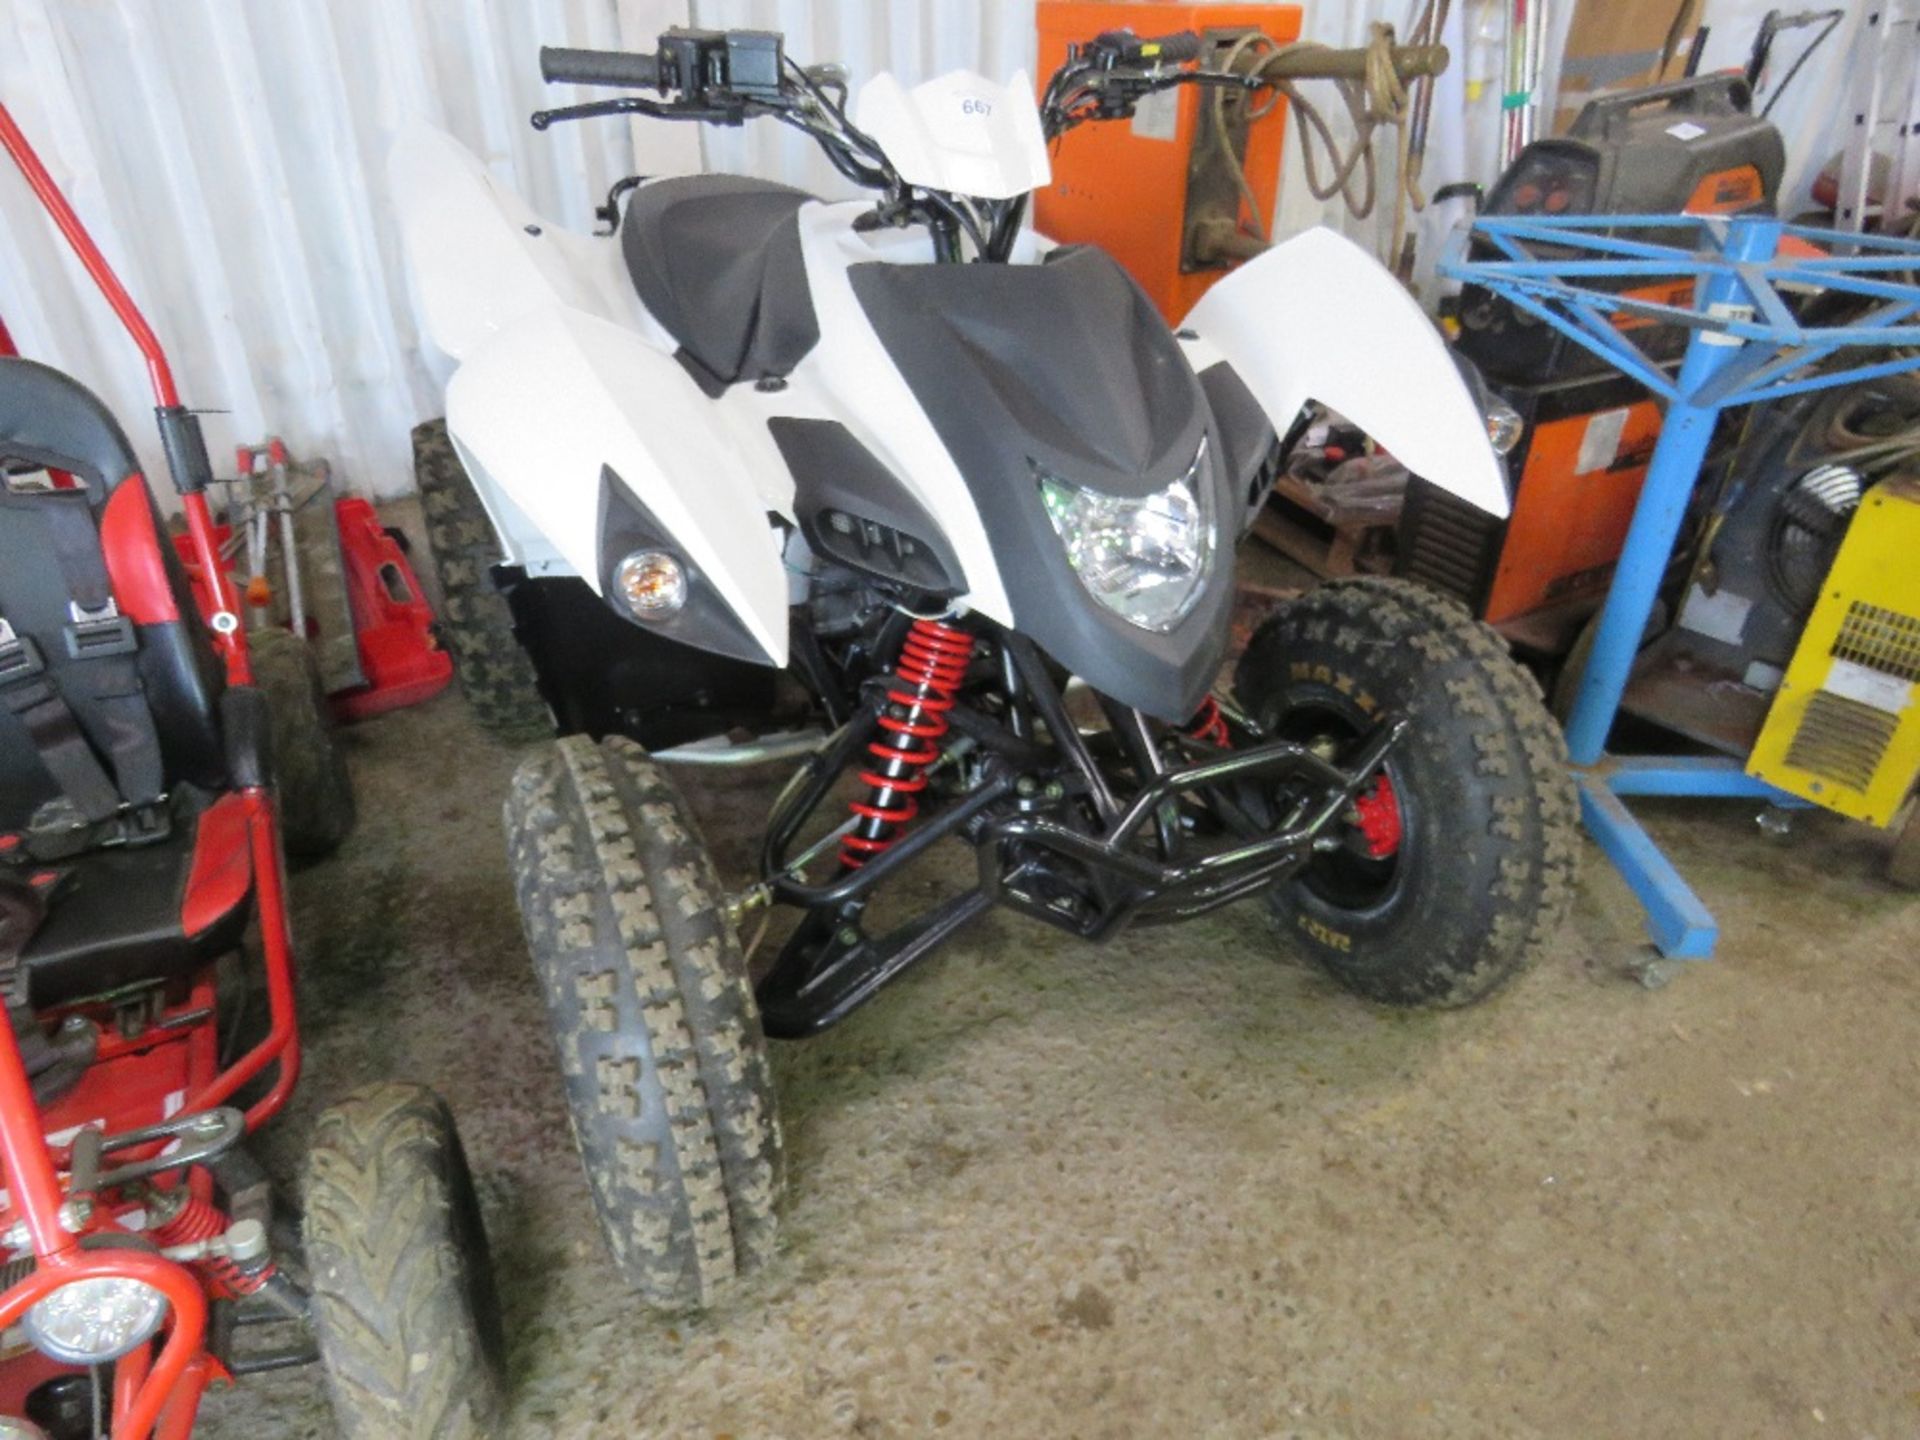 AEON 400 SPORT/ QUADZILLA RACING QUAD BIKE. 1MILE FROM NEW, UNWANTED GIFT.